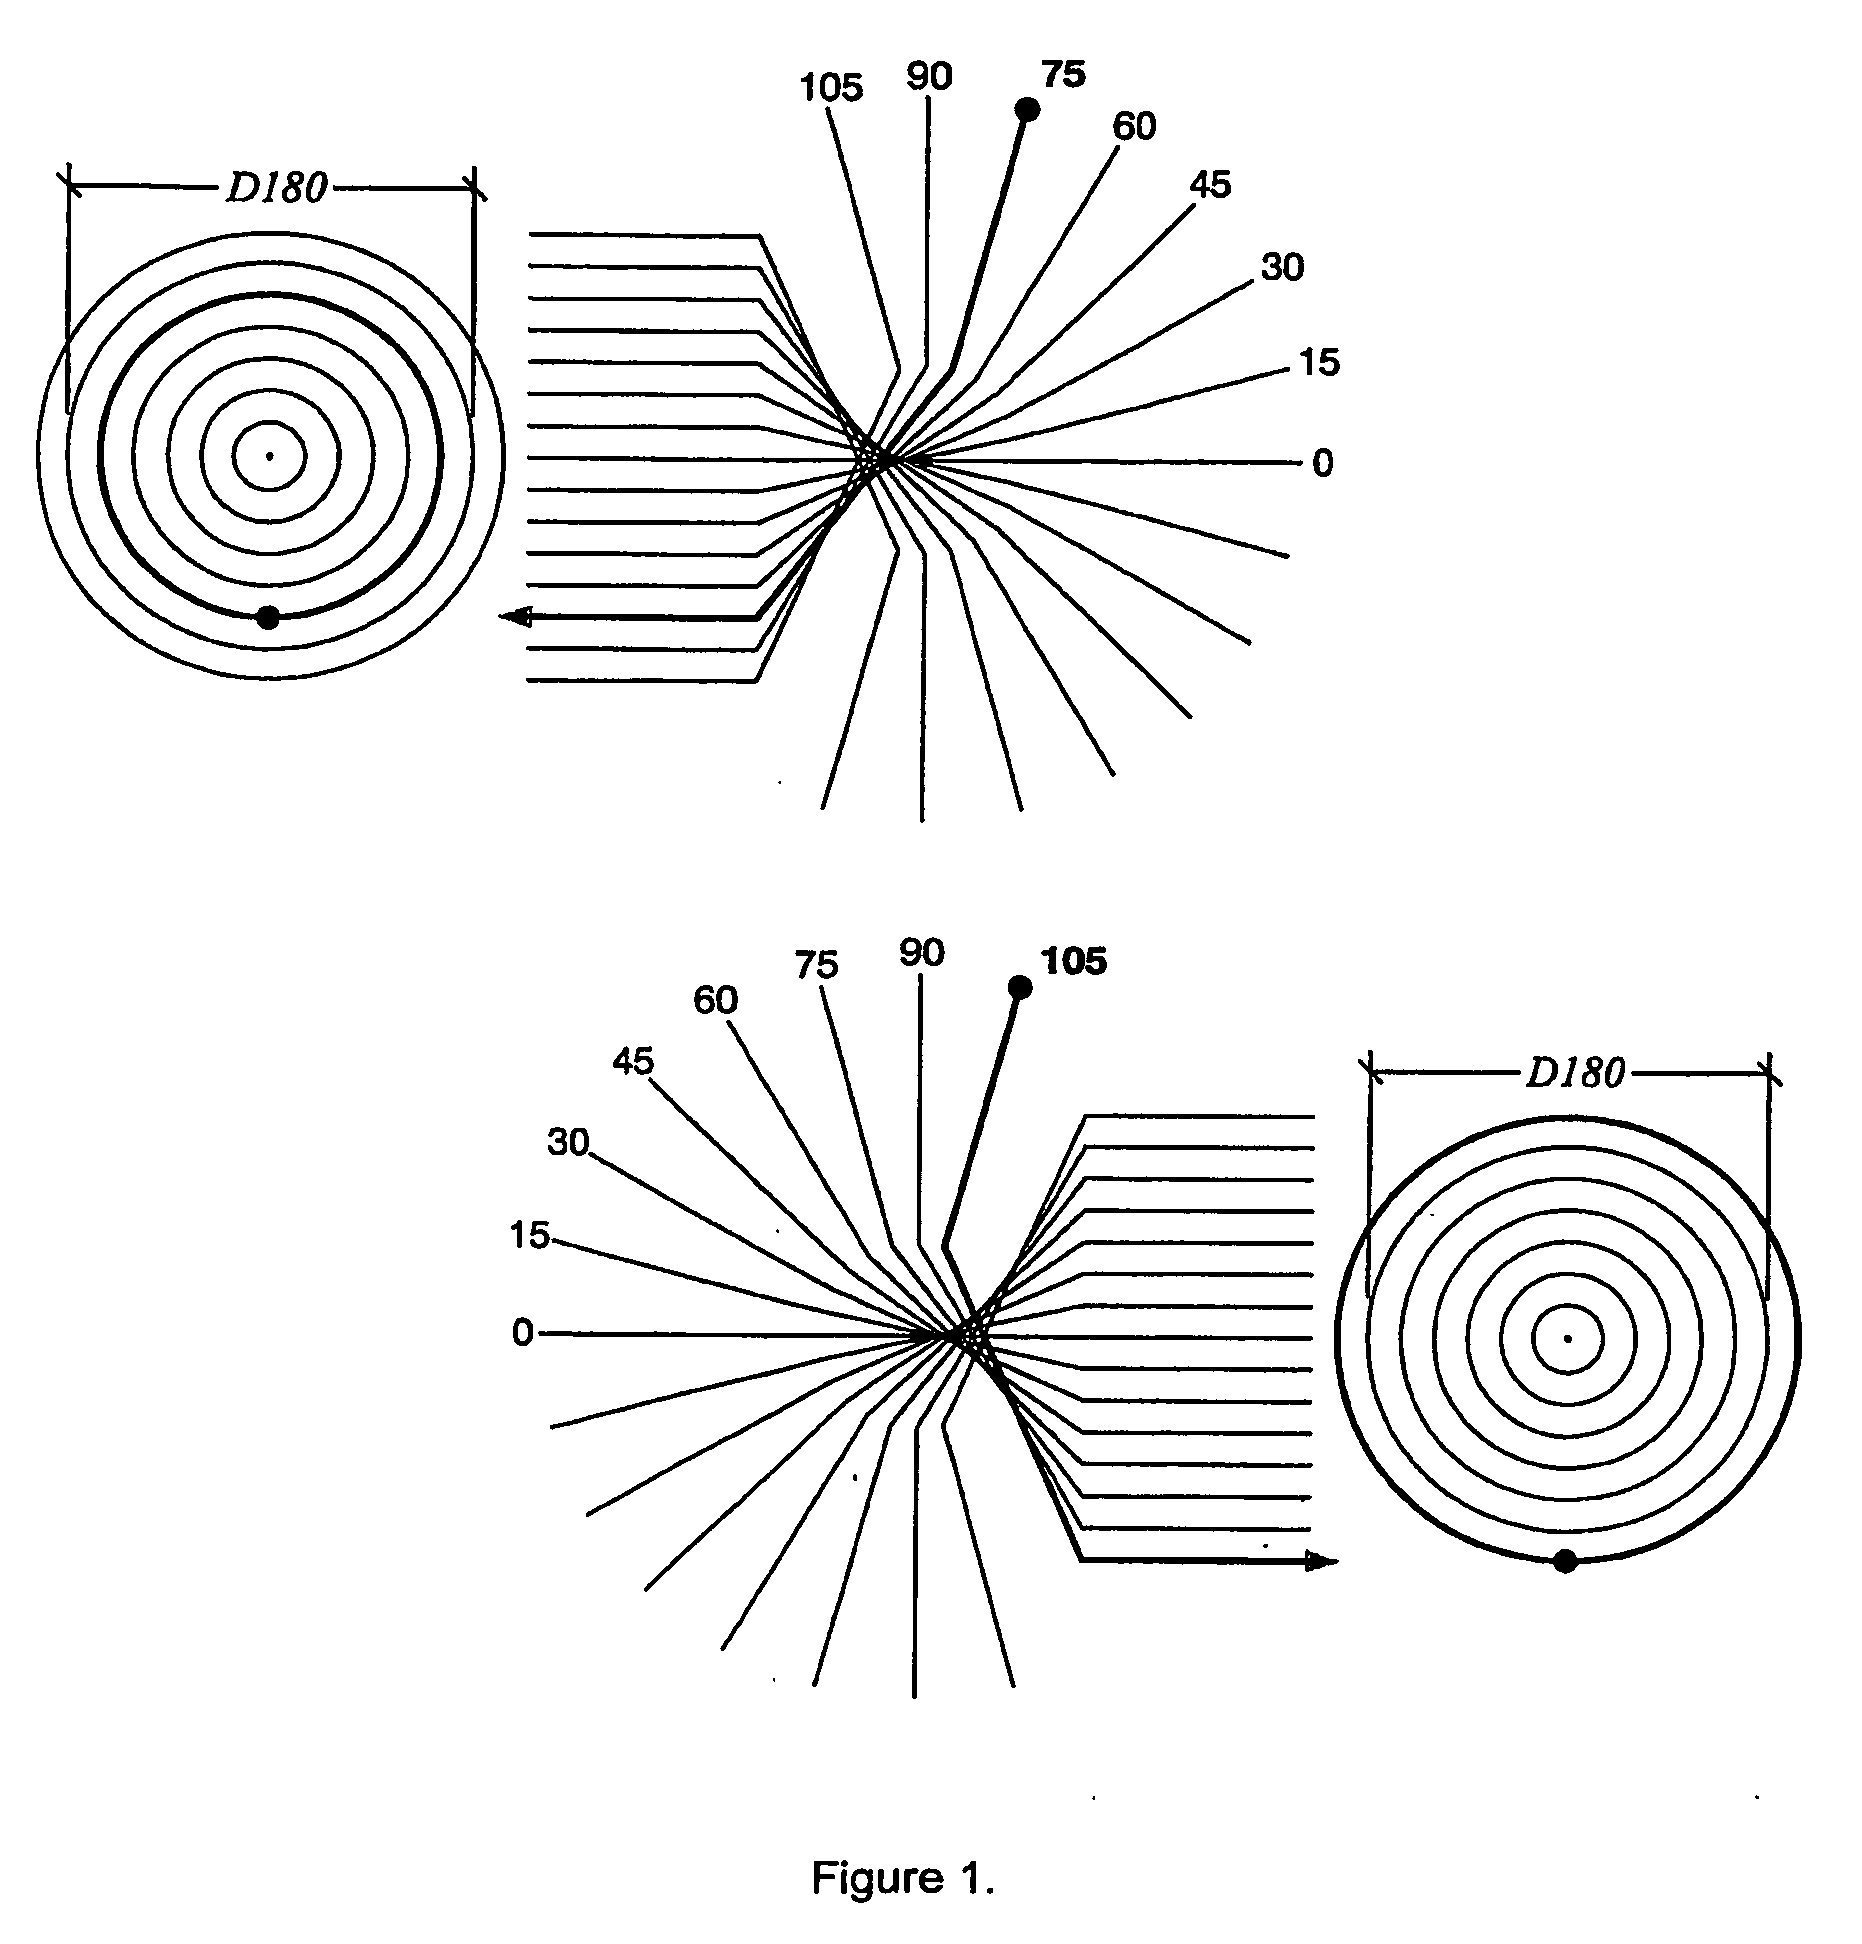 System and method for registration of cubic fisheye hemispherical images